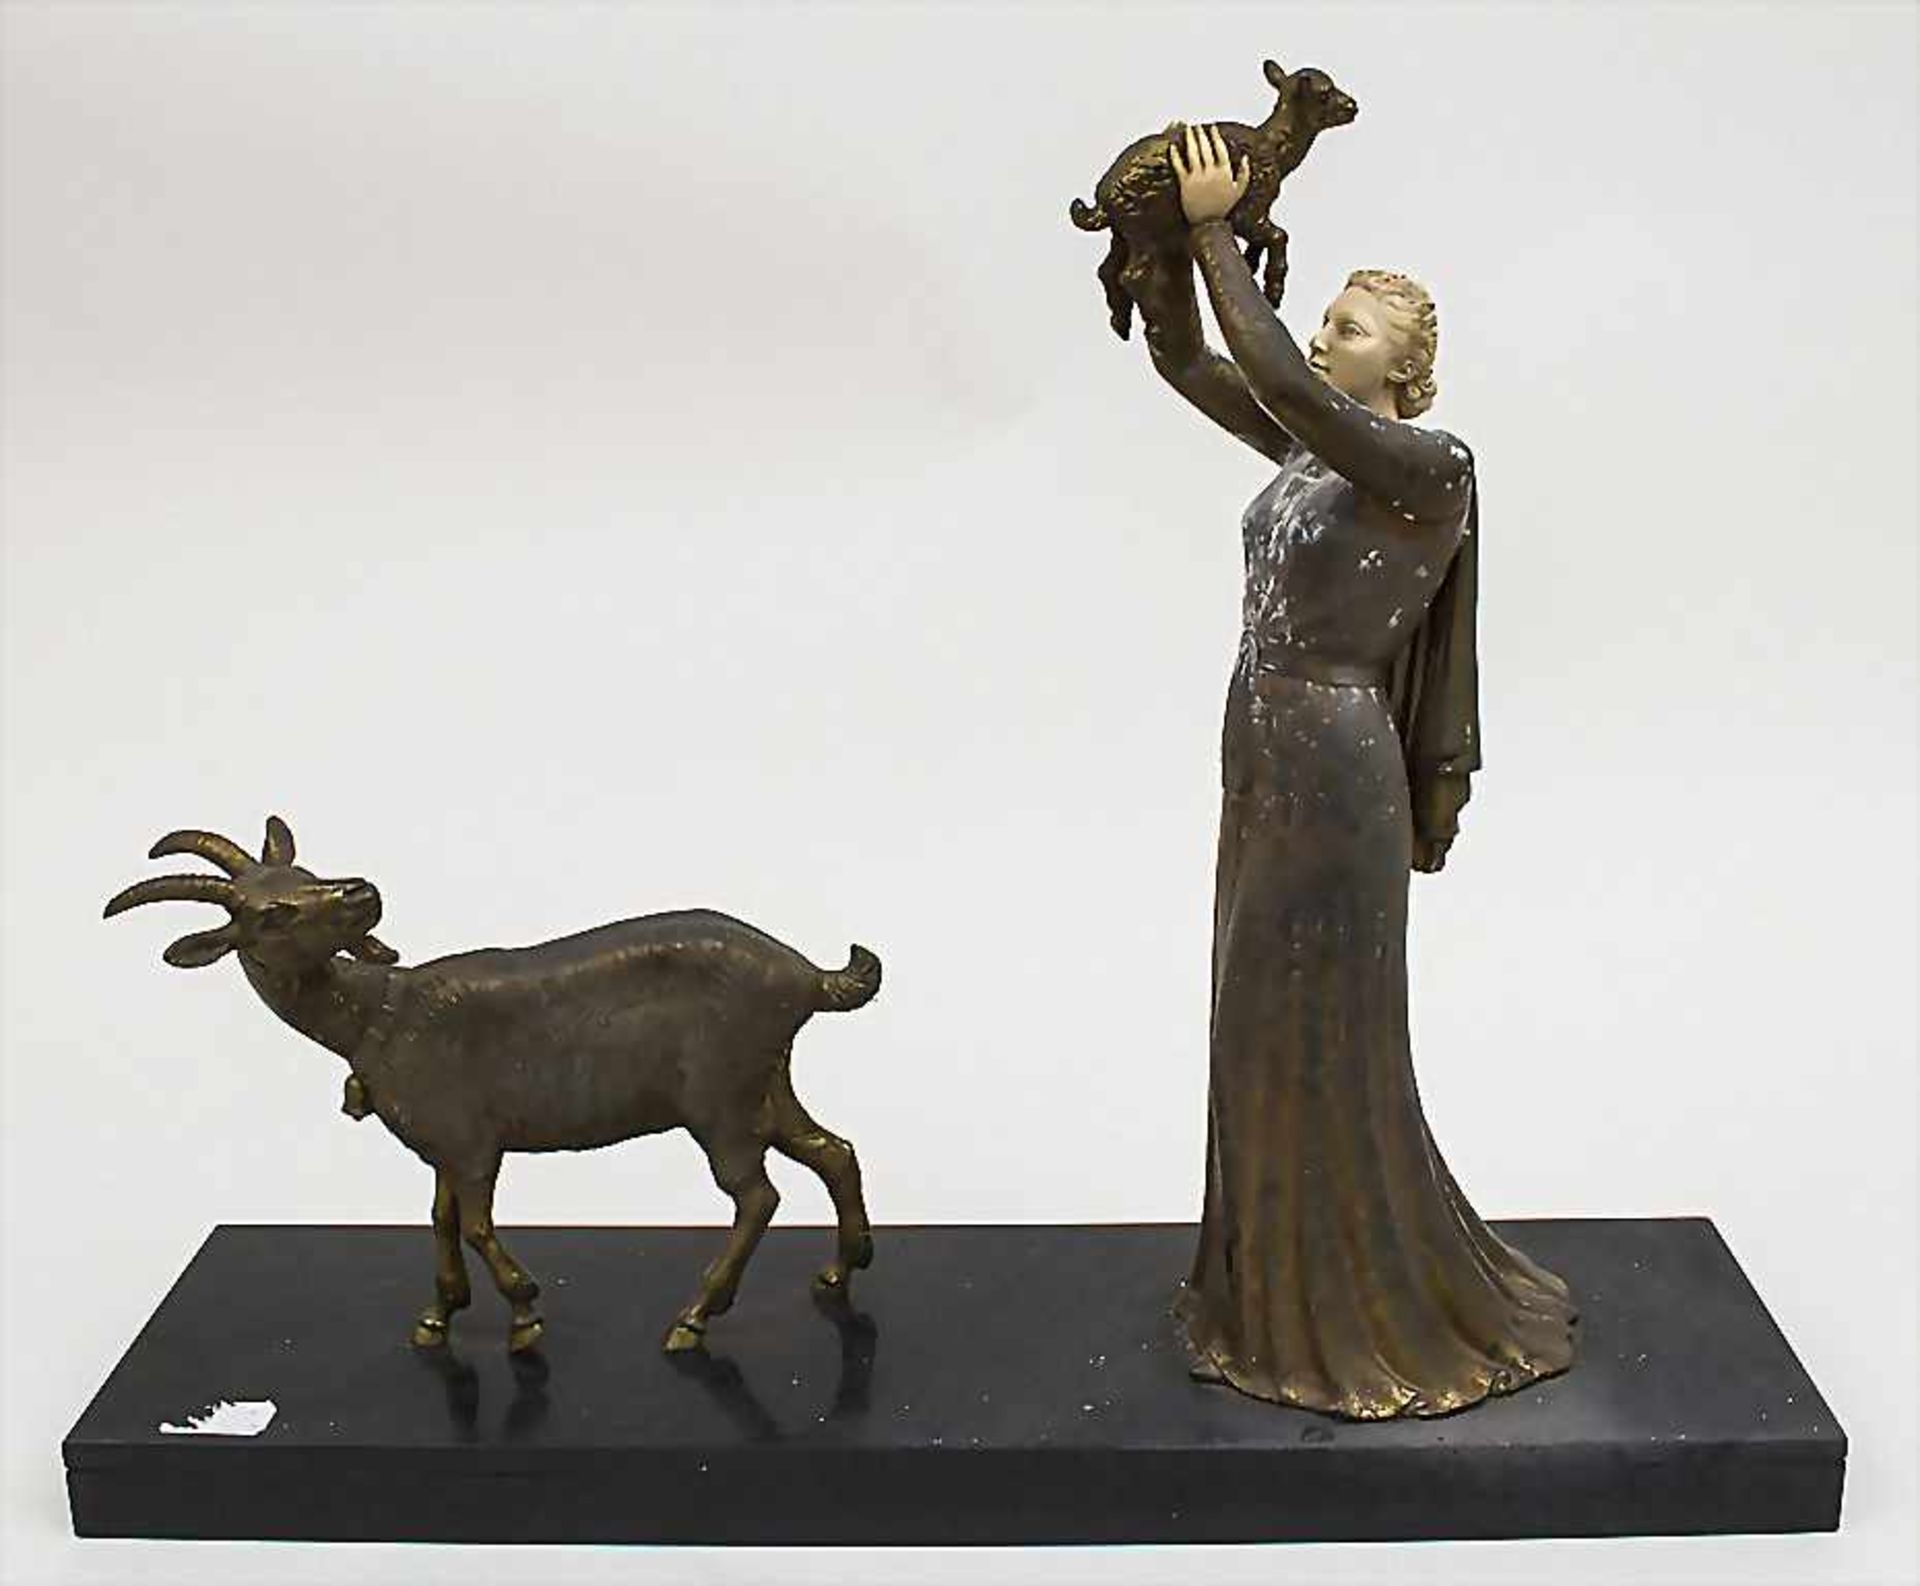 Figurengruppe 'Junge Dame mit Ziege und Kitz' / A figural group 'Young lady with goat and cub'